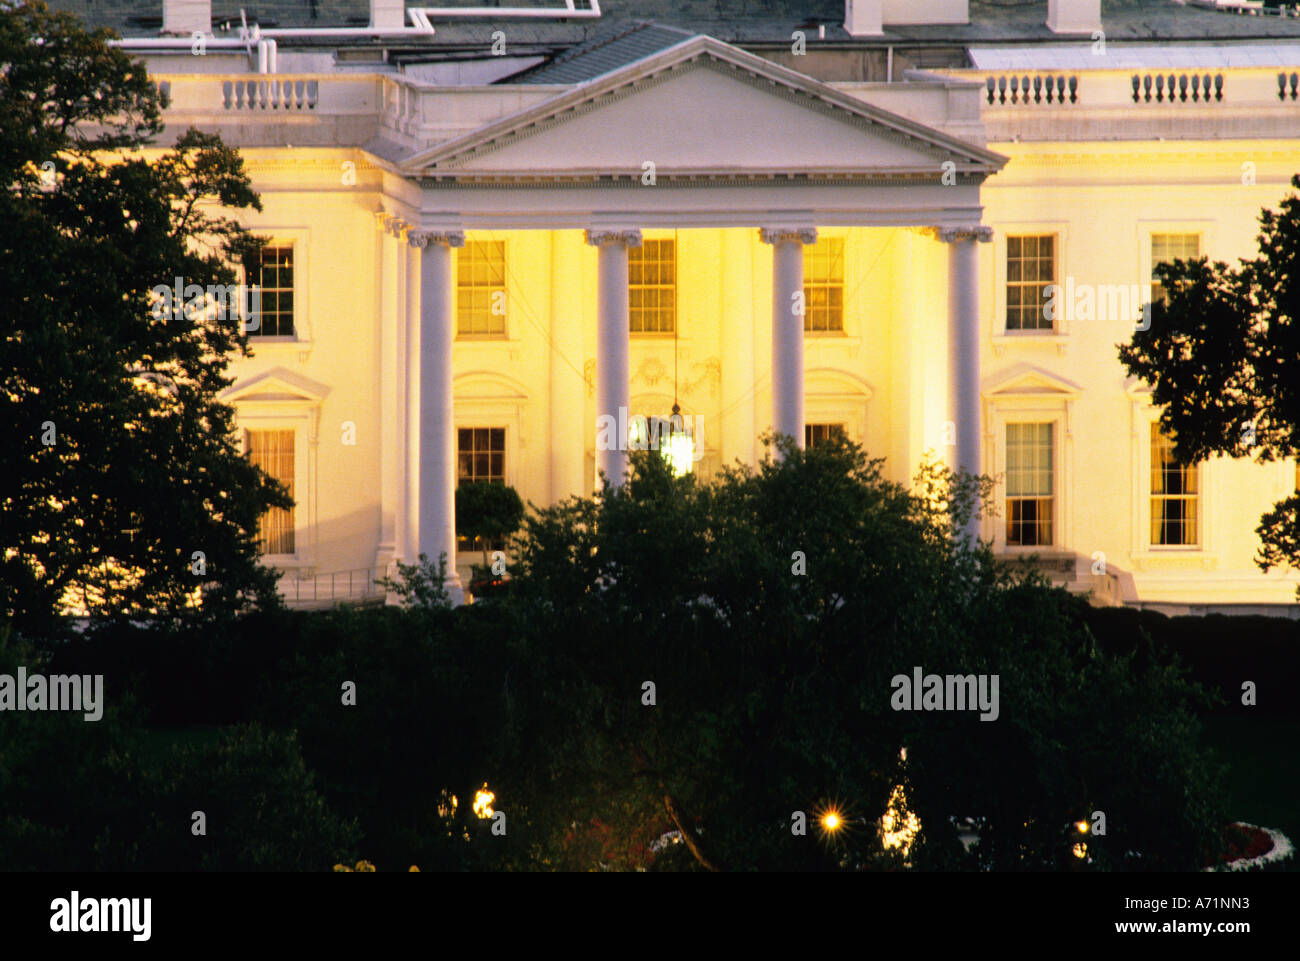 The White House, Washington DC at night elevated north portico view.  Residence of President of the United States. Landmark historic building. USA Stock Photo